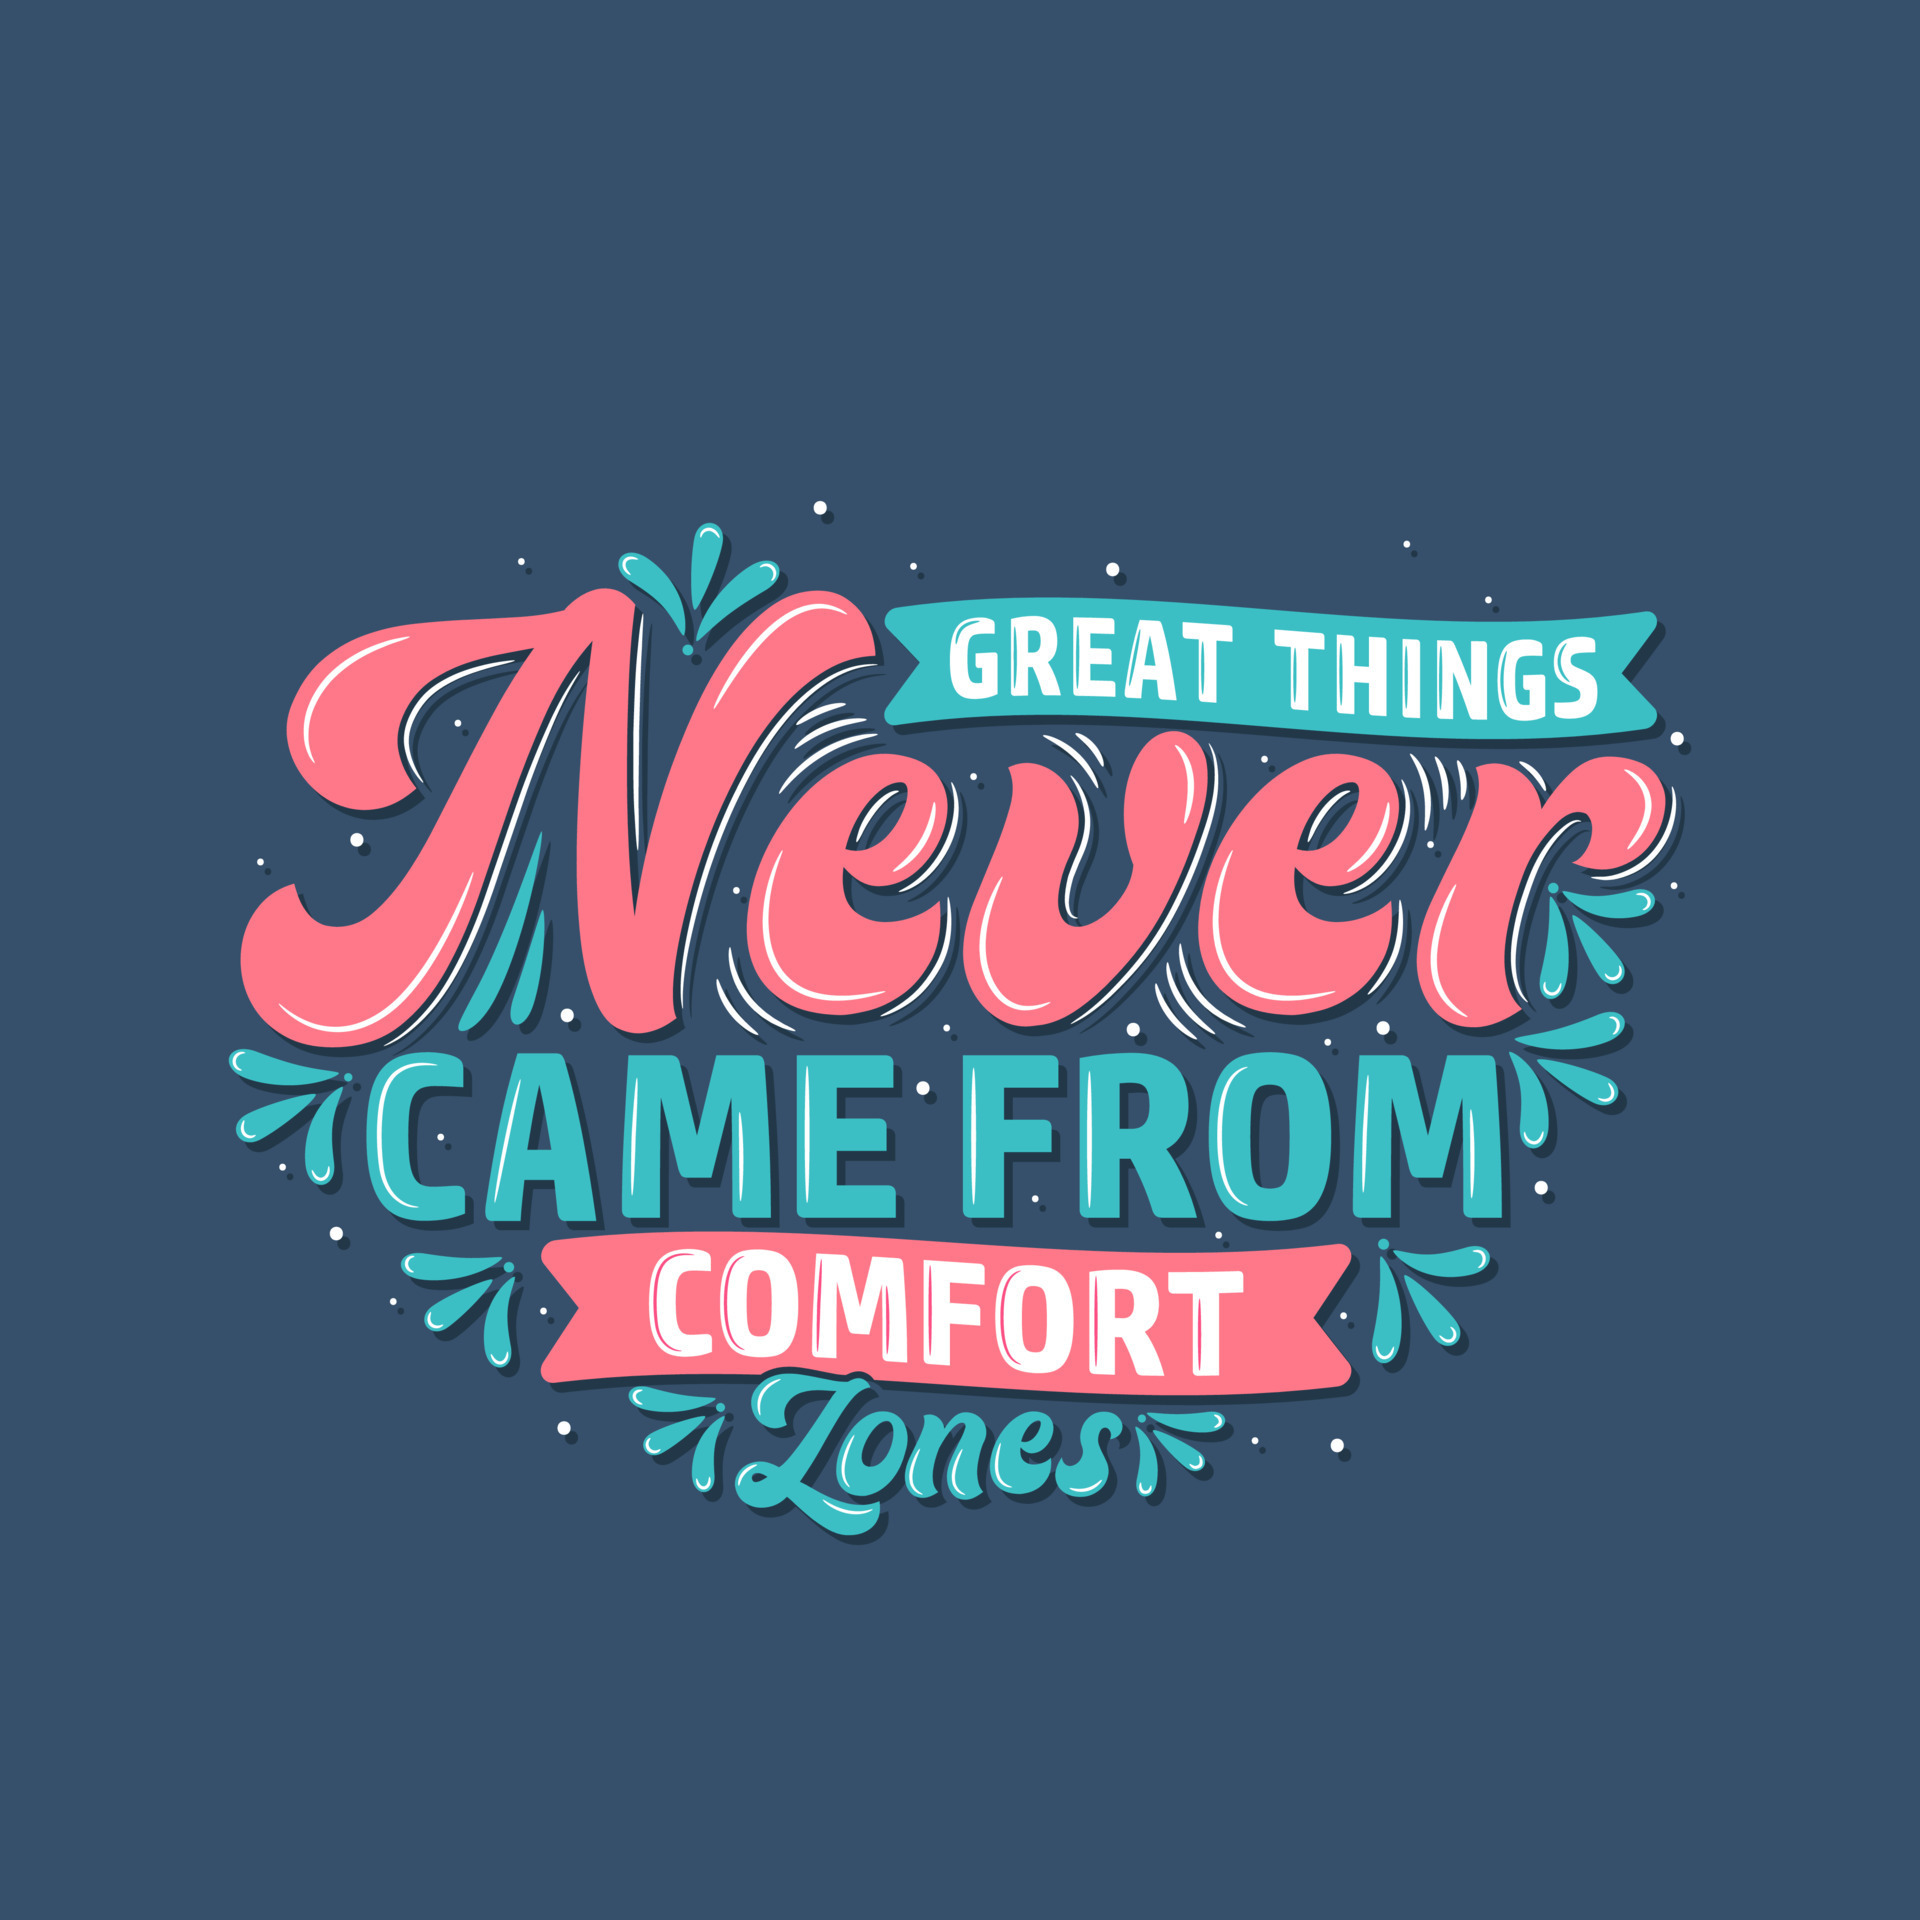 Great things never came from comfort zones, Motivational quote